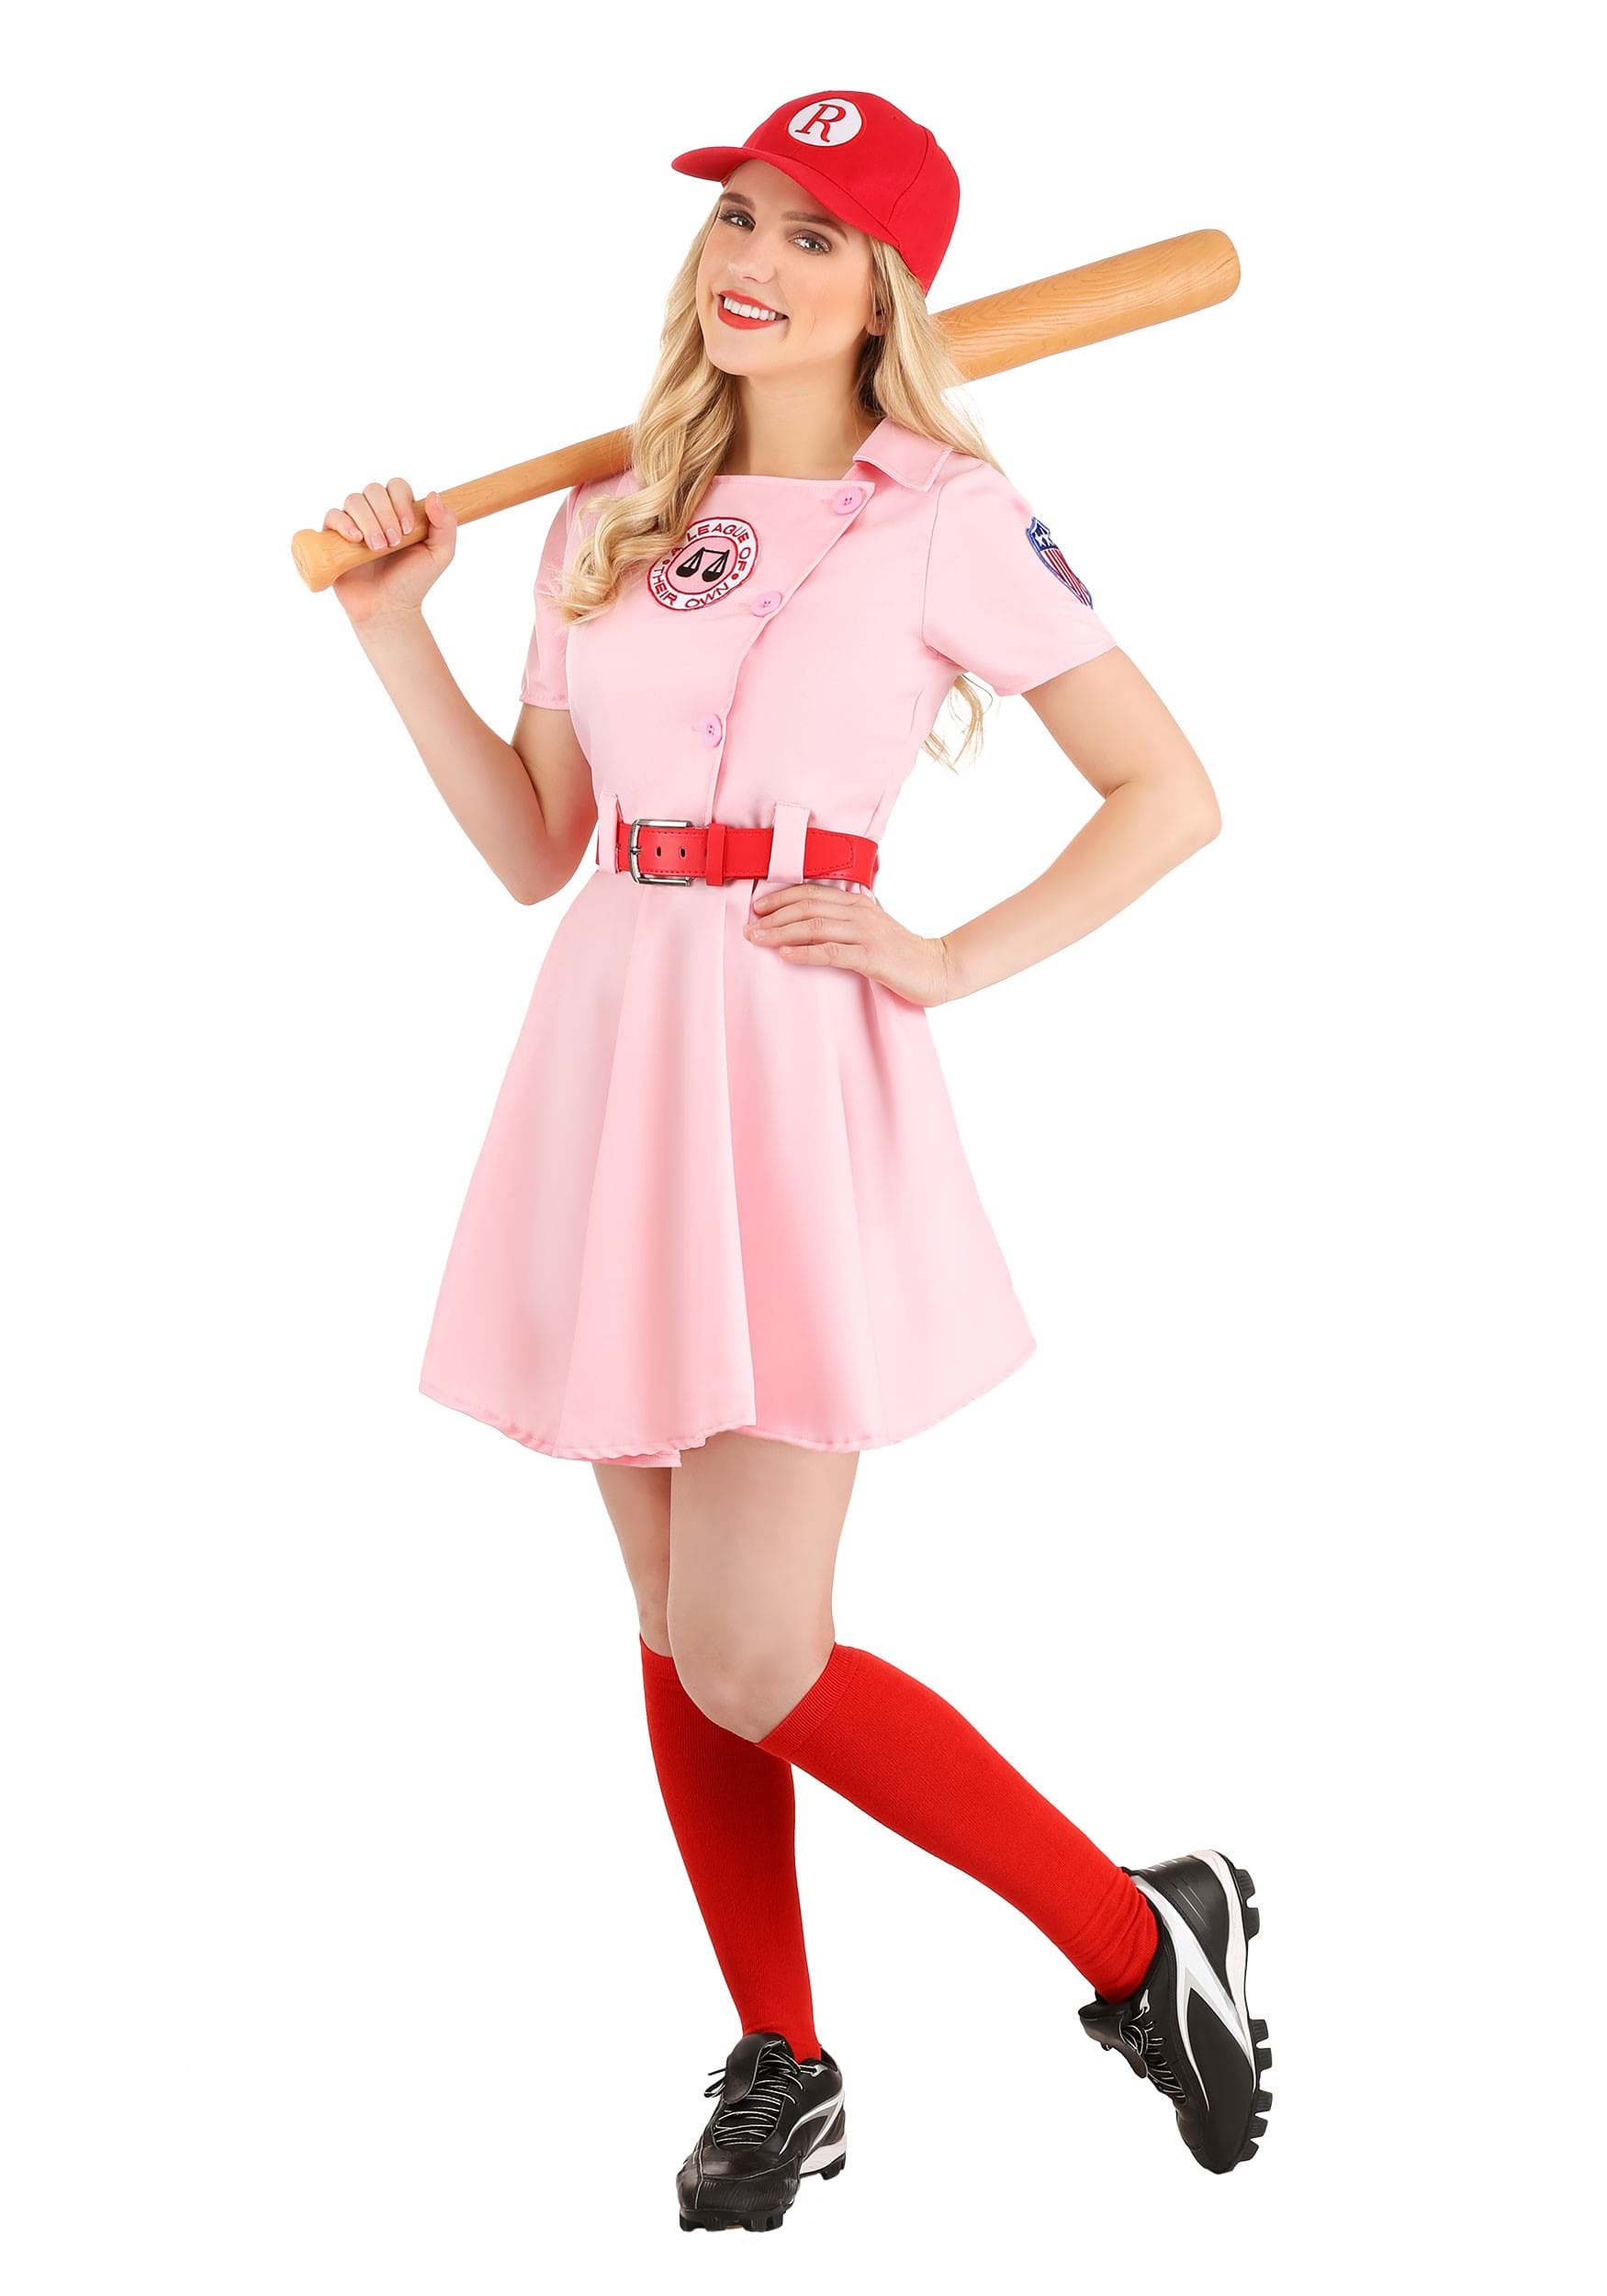 A League of Their Own Dottie Womens Costume | Baseball Costumes